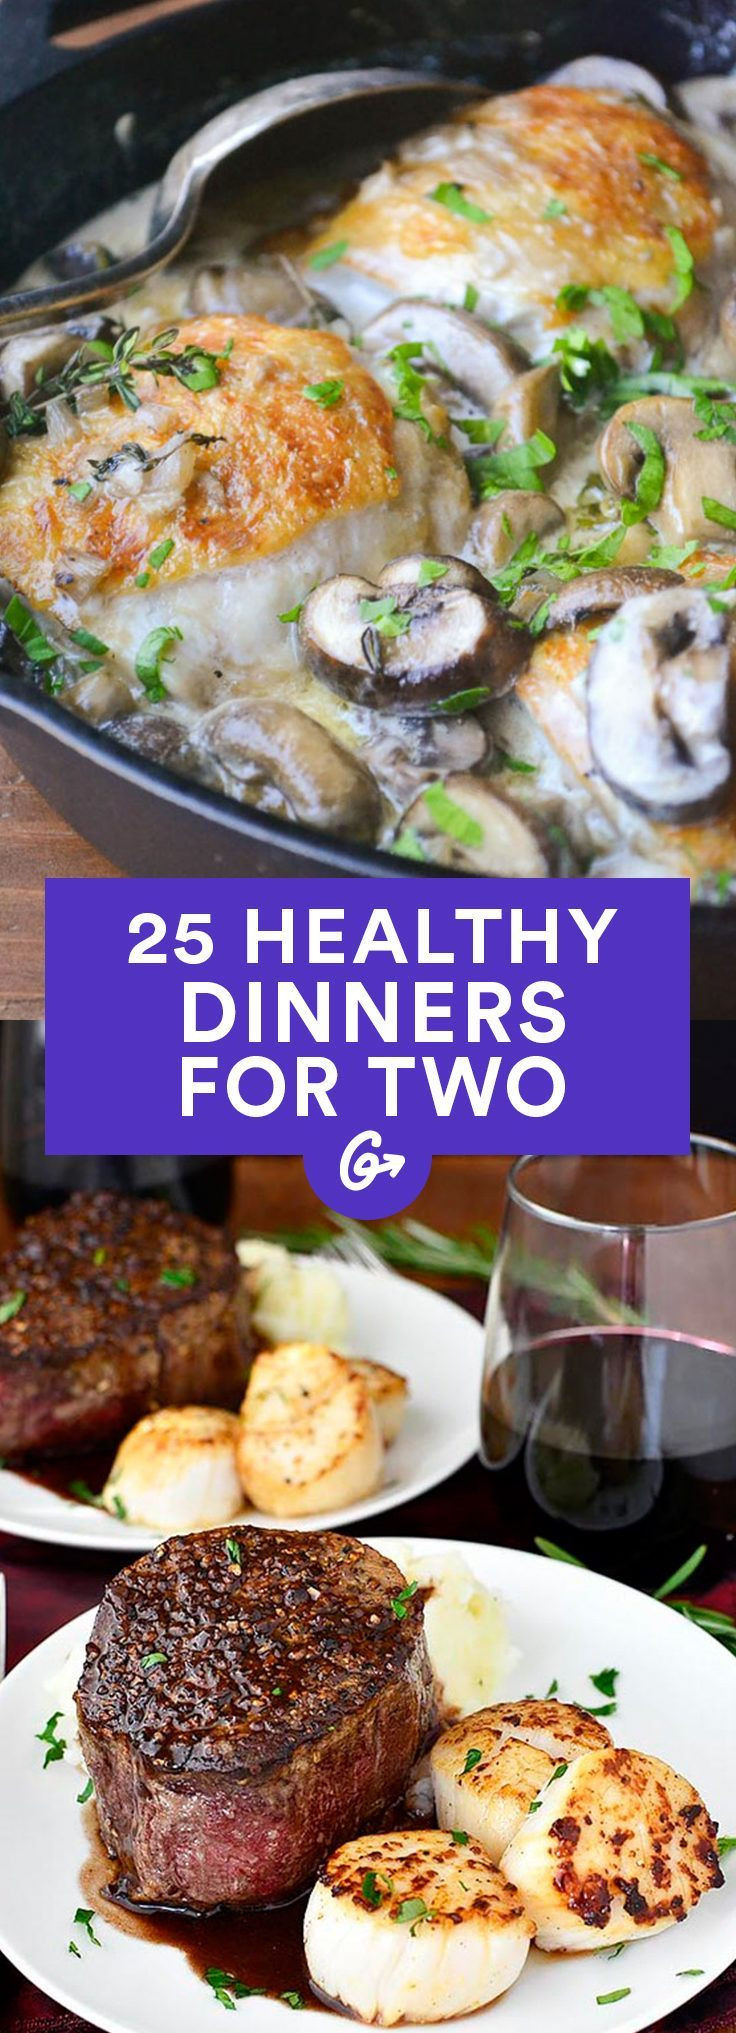 Easy Dinner Recipes For Two Healthy
 25 Healthy Dinner Recipes for Two